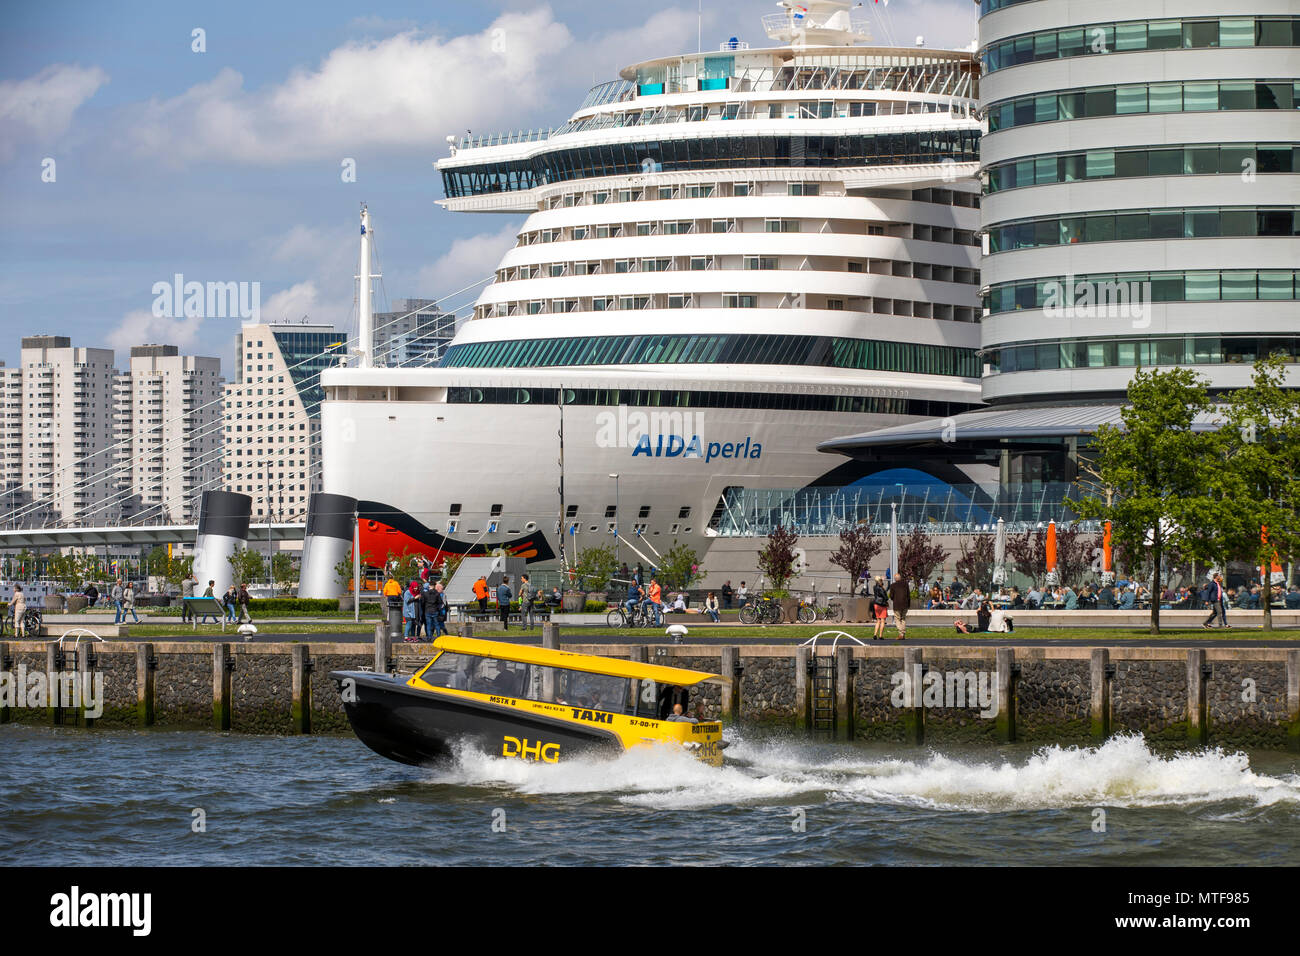 The skyline of Rotterdam, on the Nieuwe Maas, at the 'Kop van Zuid' district, Netherlands, Hotel New York, Aida Perla Cruise ship at the Cruise Termin Stock Photo